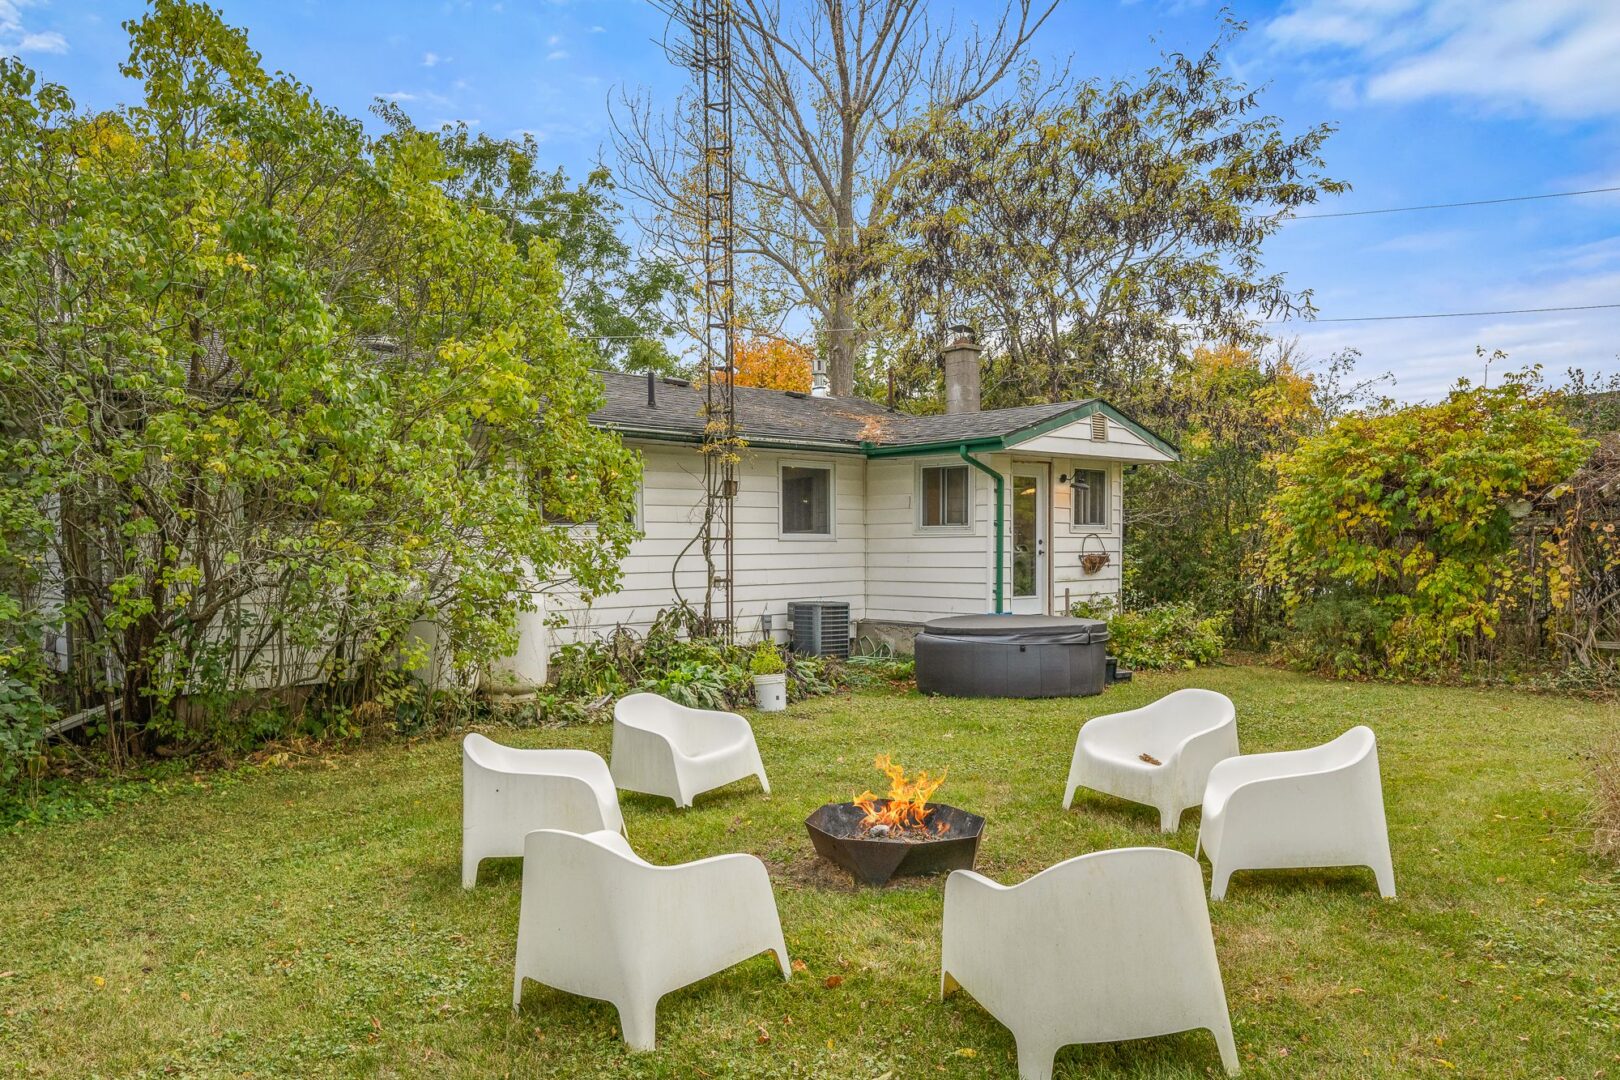 Chairs sit around a fire pit in an open, grassy outdoor space in the backyard of a small bungalow.